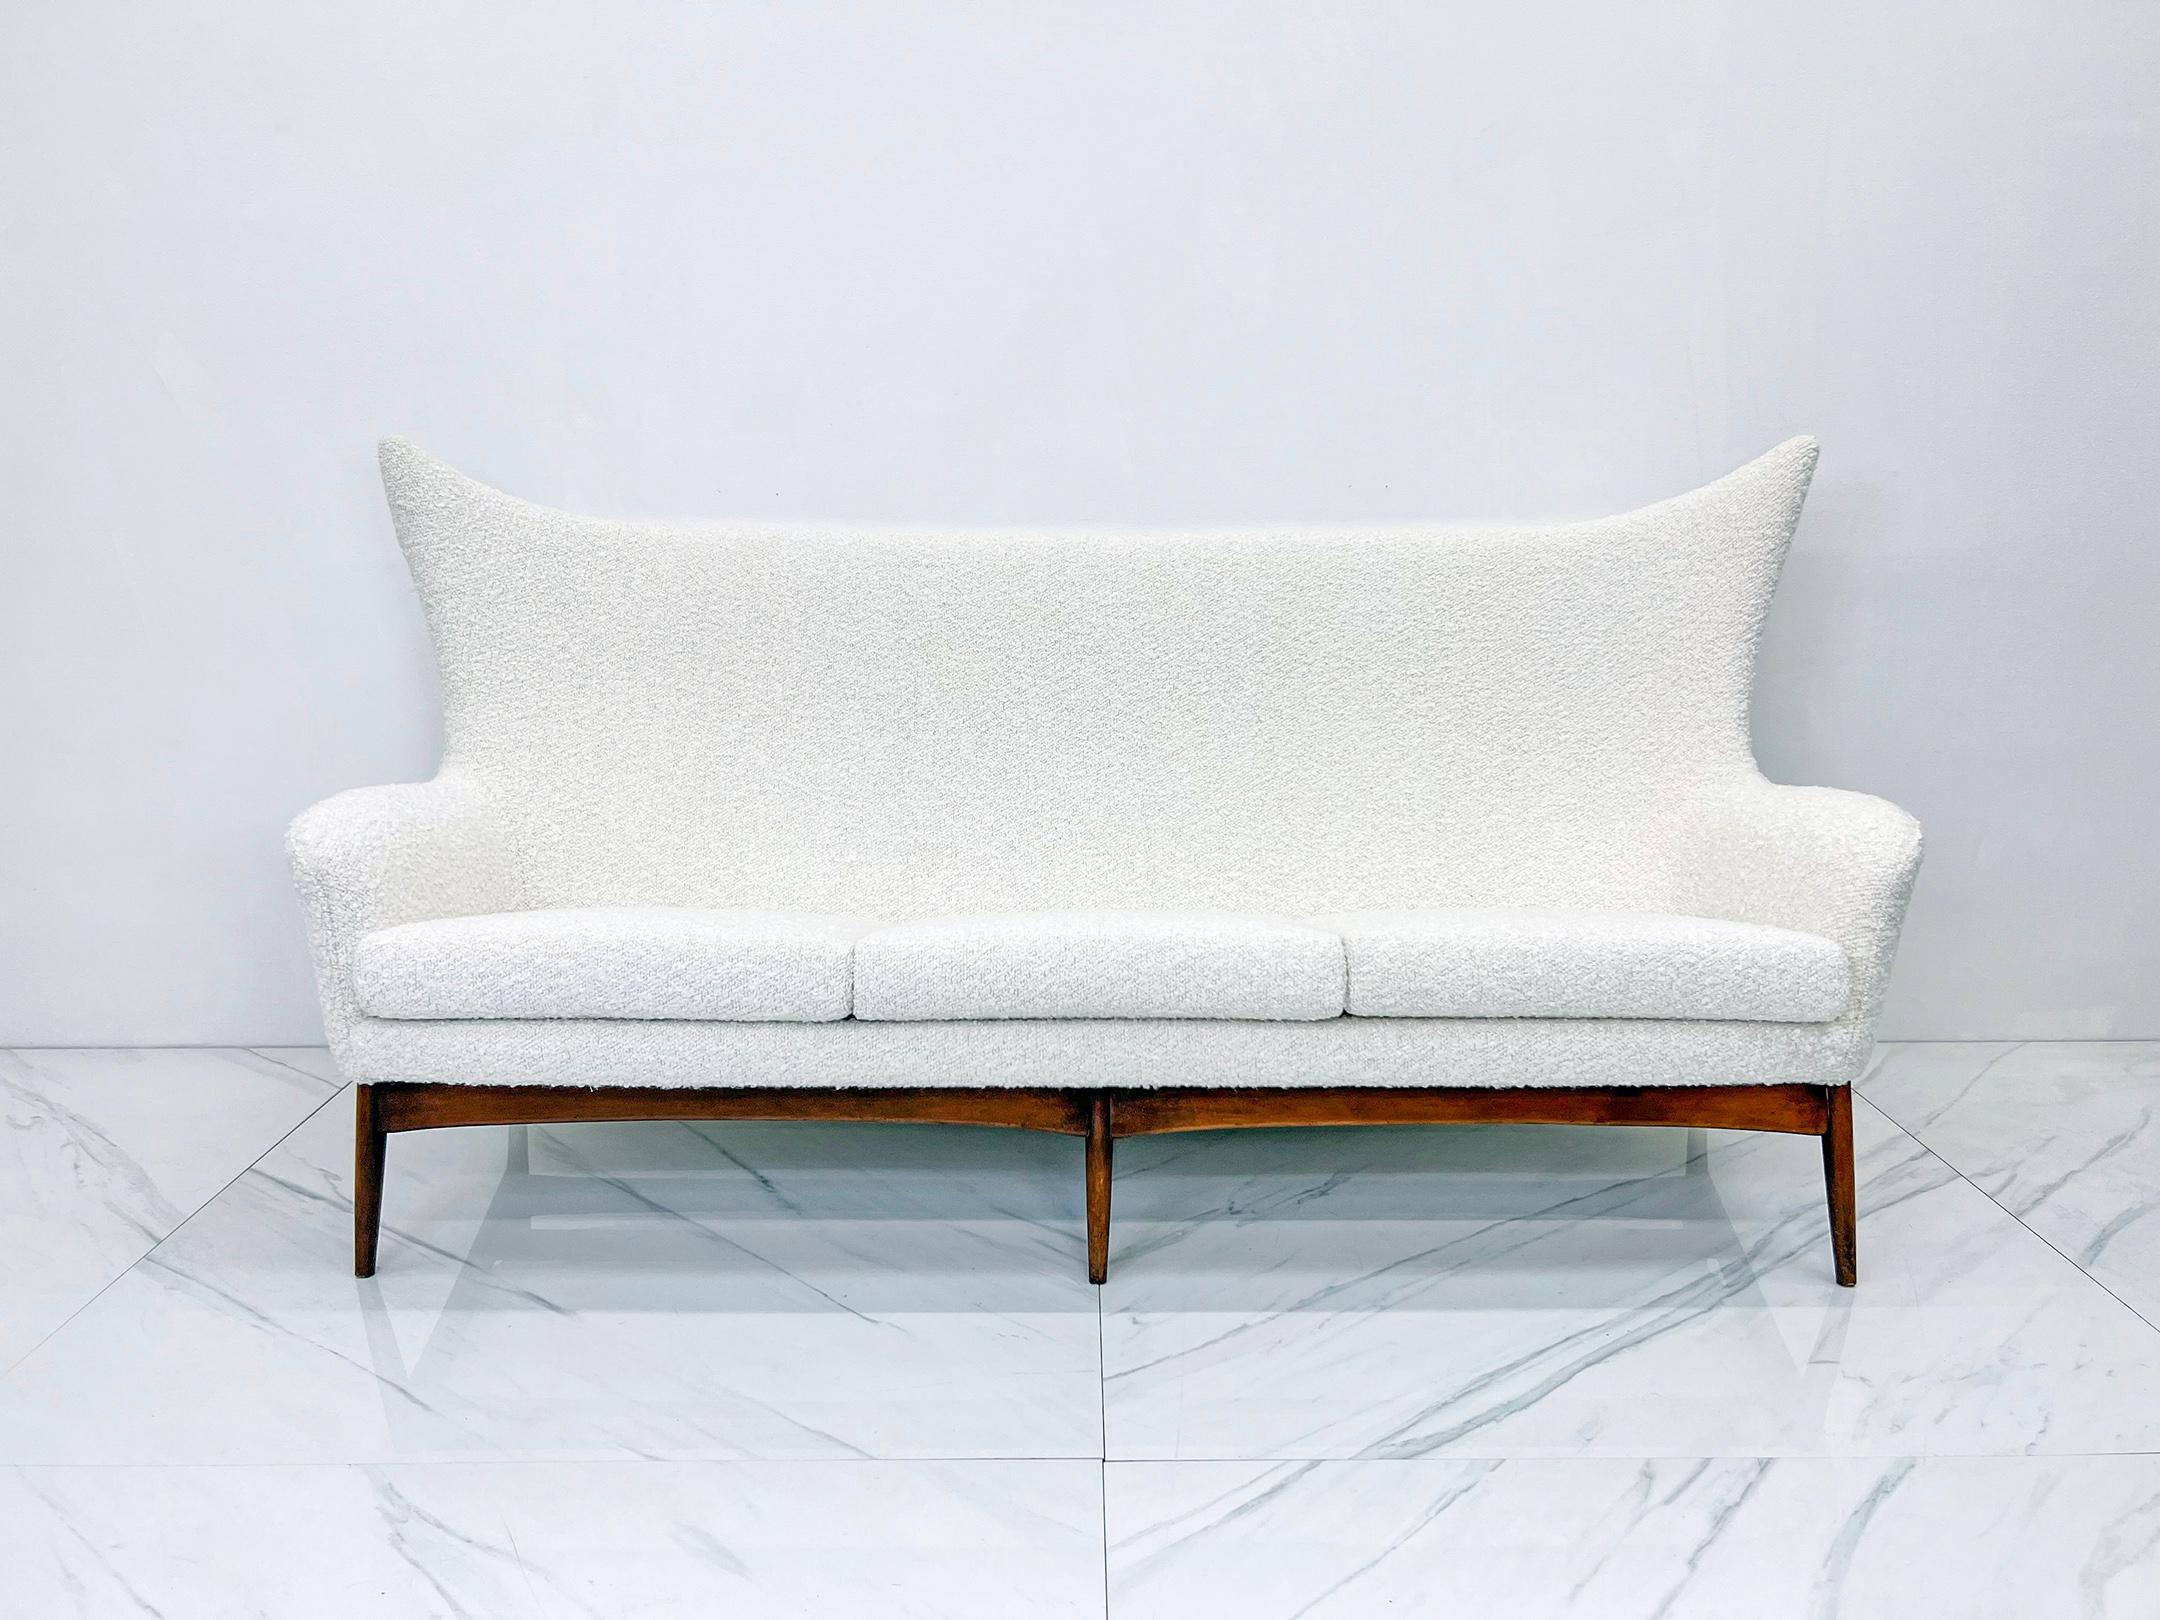 Mid-20th Century Sculptural Wingback Sofa by H.W. Klein for Bramin Mobler of Denmark, 1950's For Sale